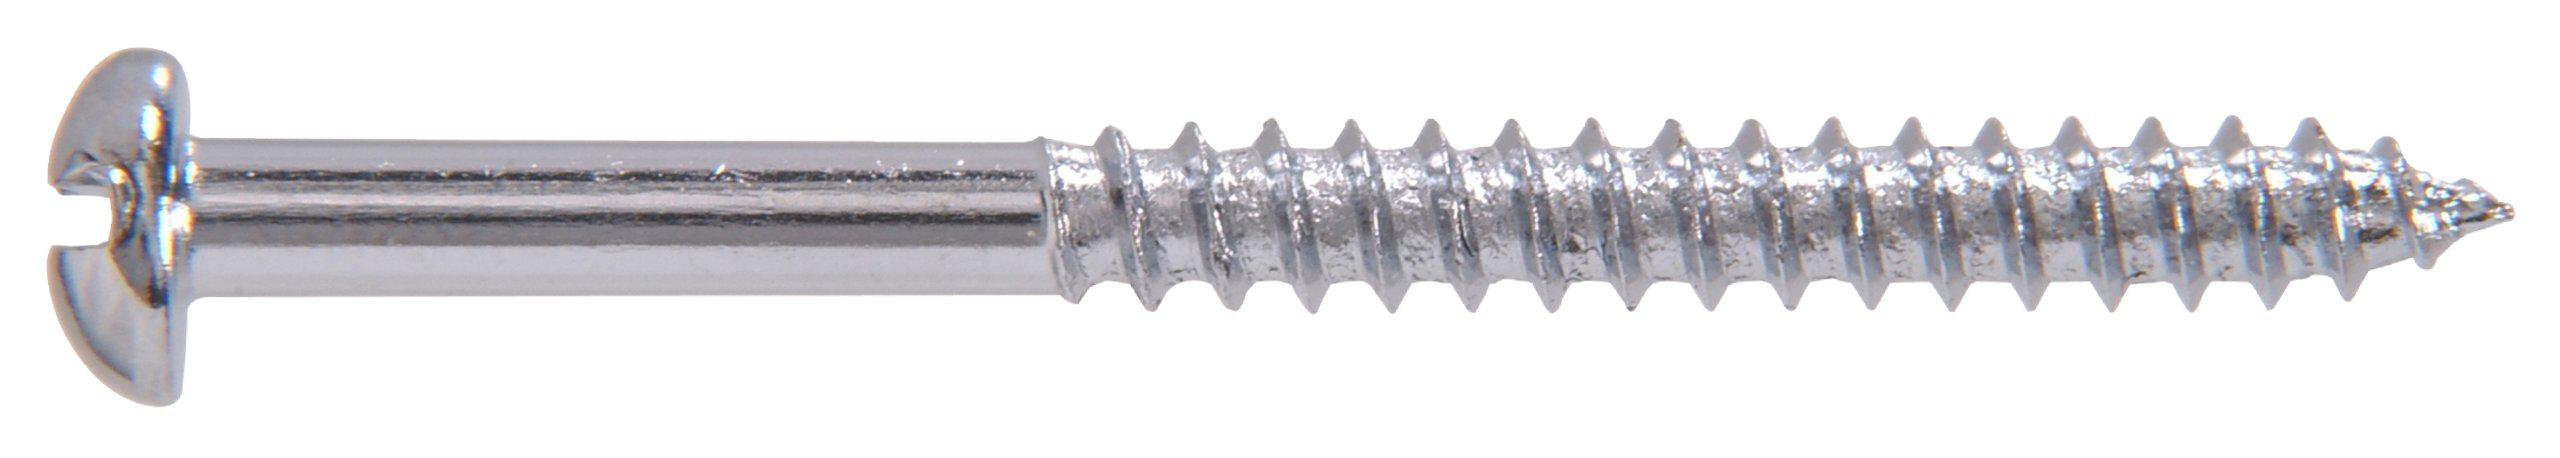 Hillman The Hillman Group Hillman 1396 4 X 34 In. Chrome Plated Steel Round Head Slotted Wood Screw 60-Pack